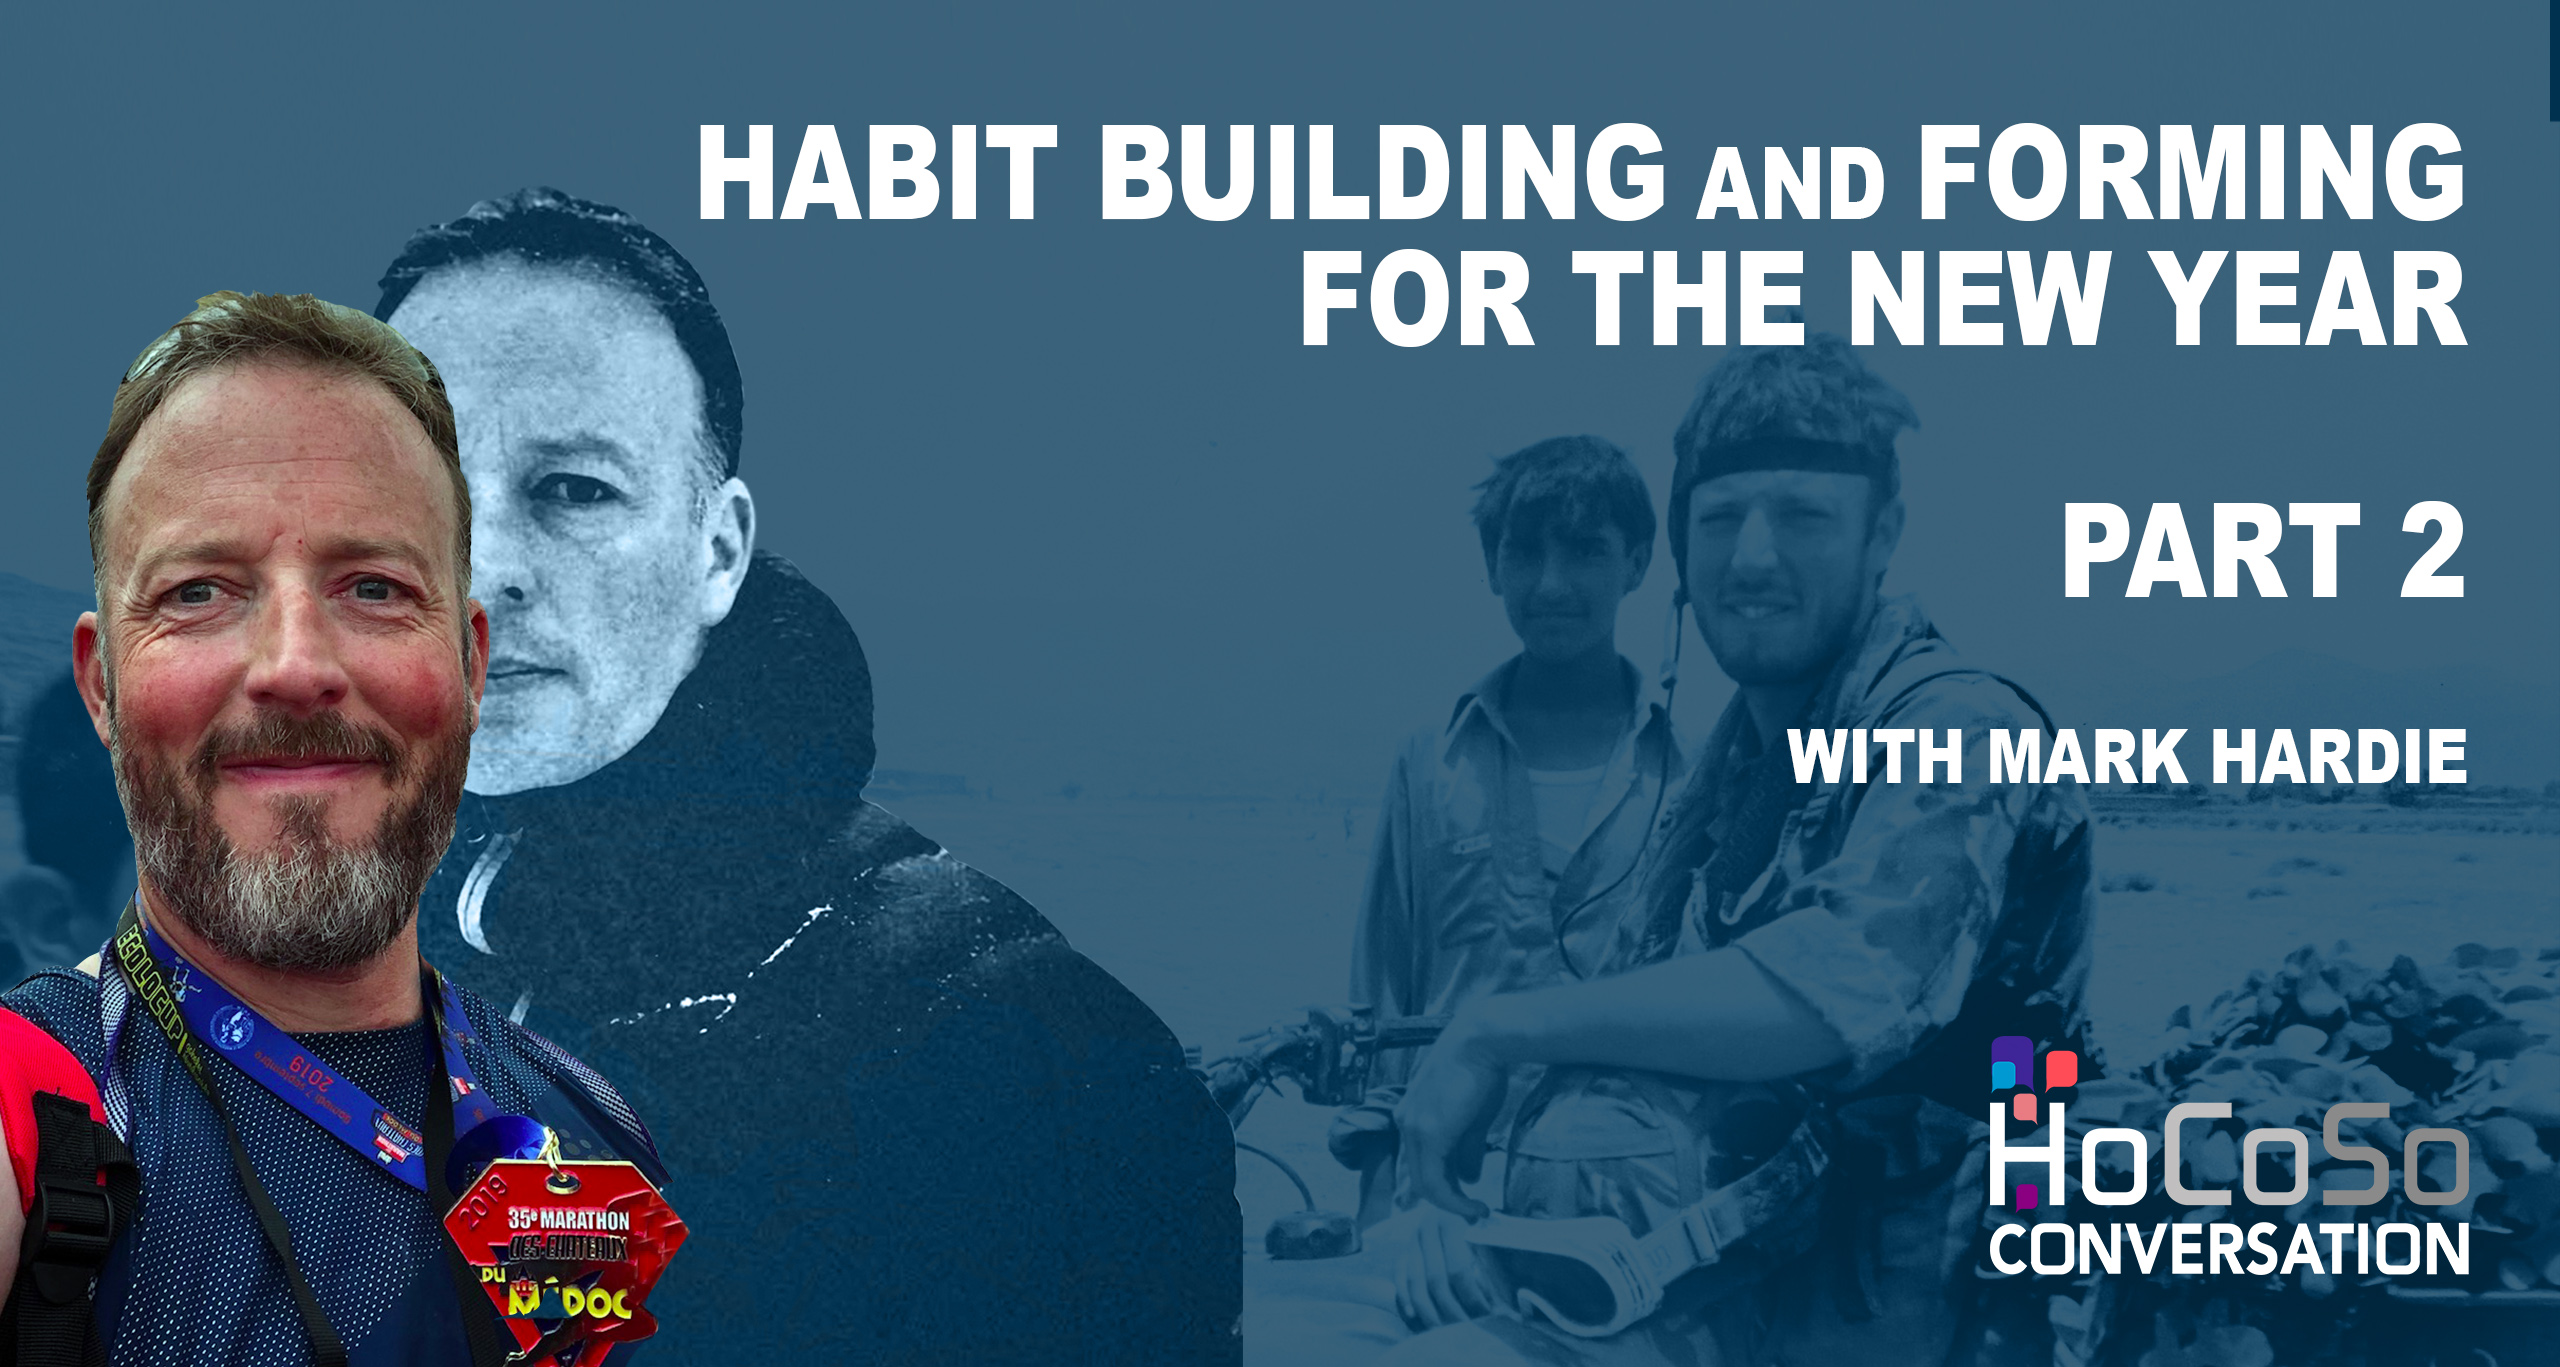 Habit Building and forming for the new year - with Mark Hardie - Part 2